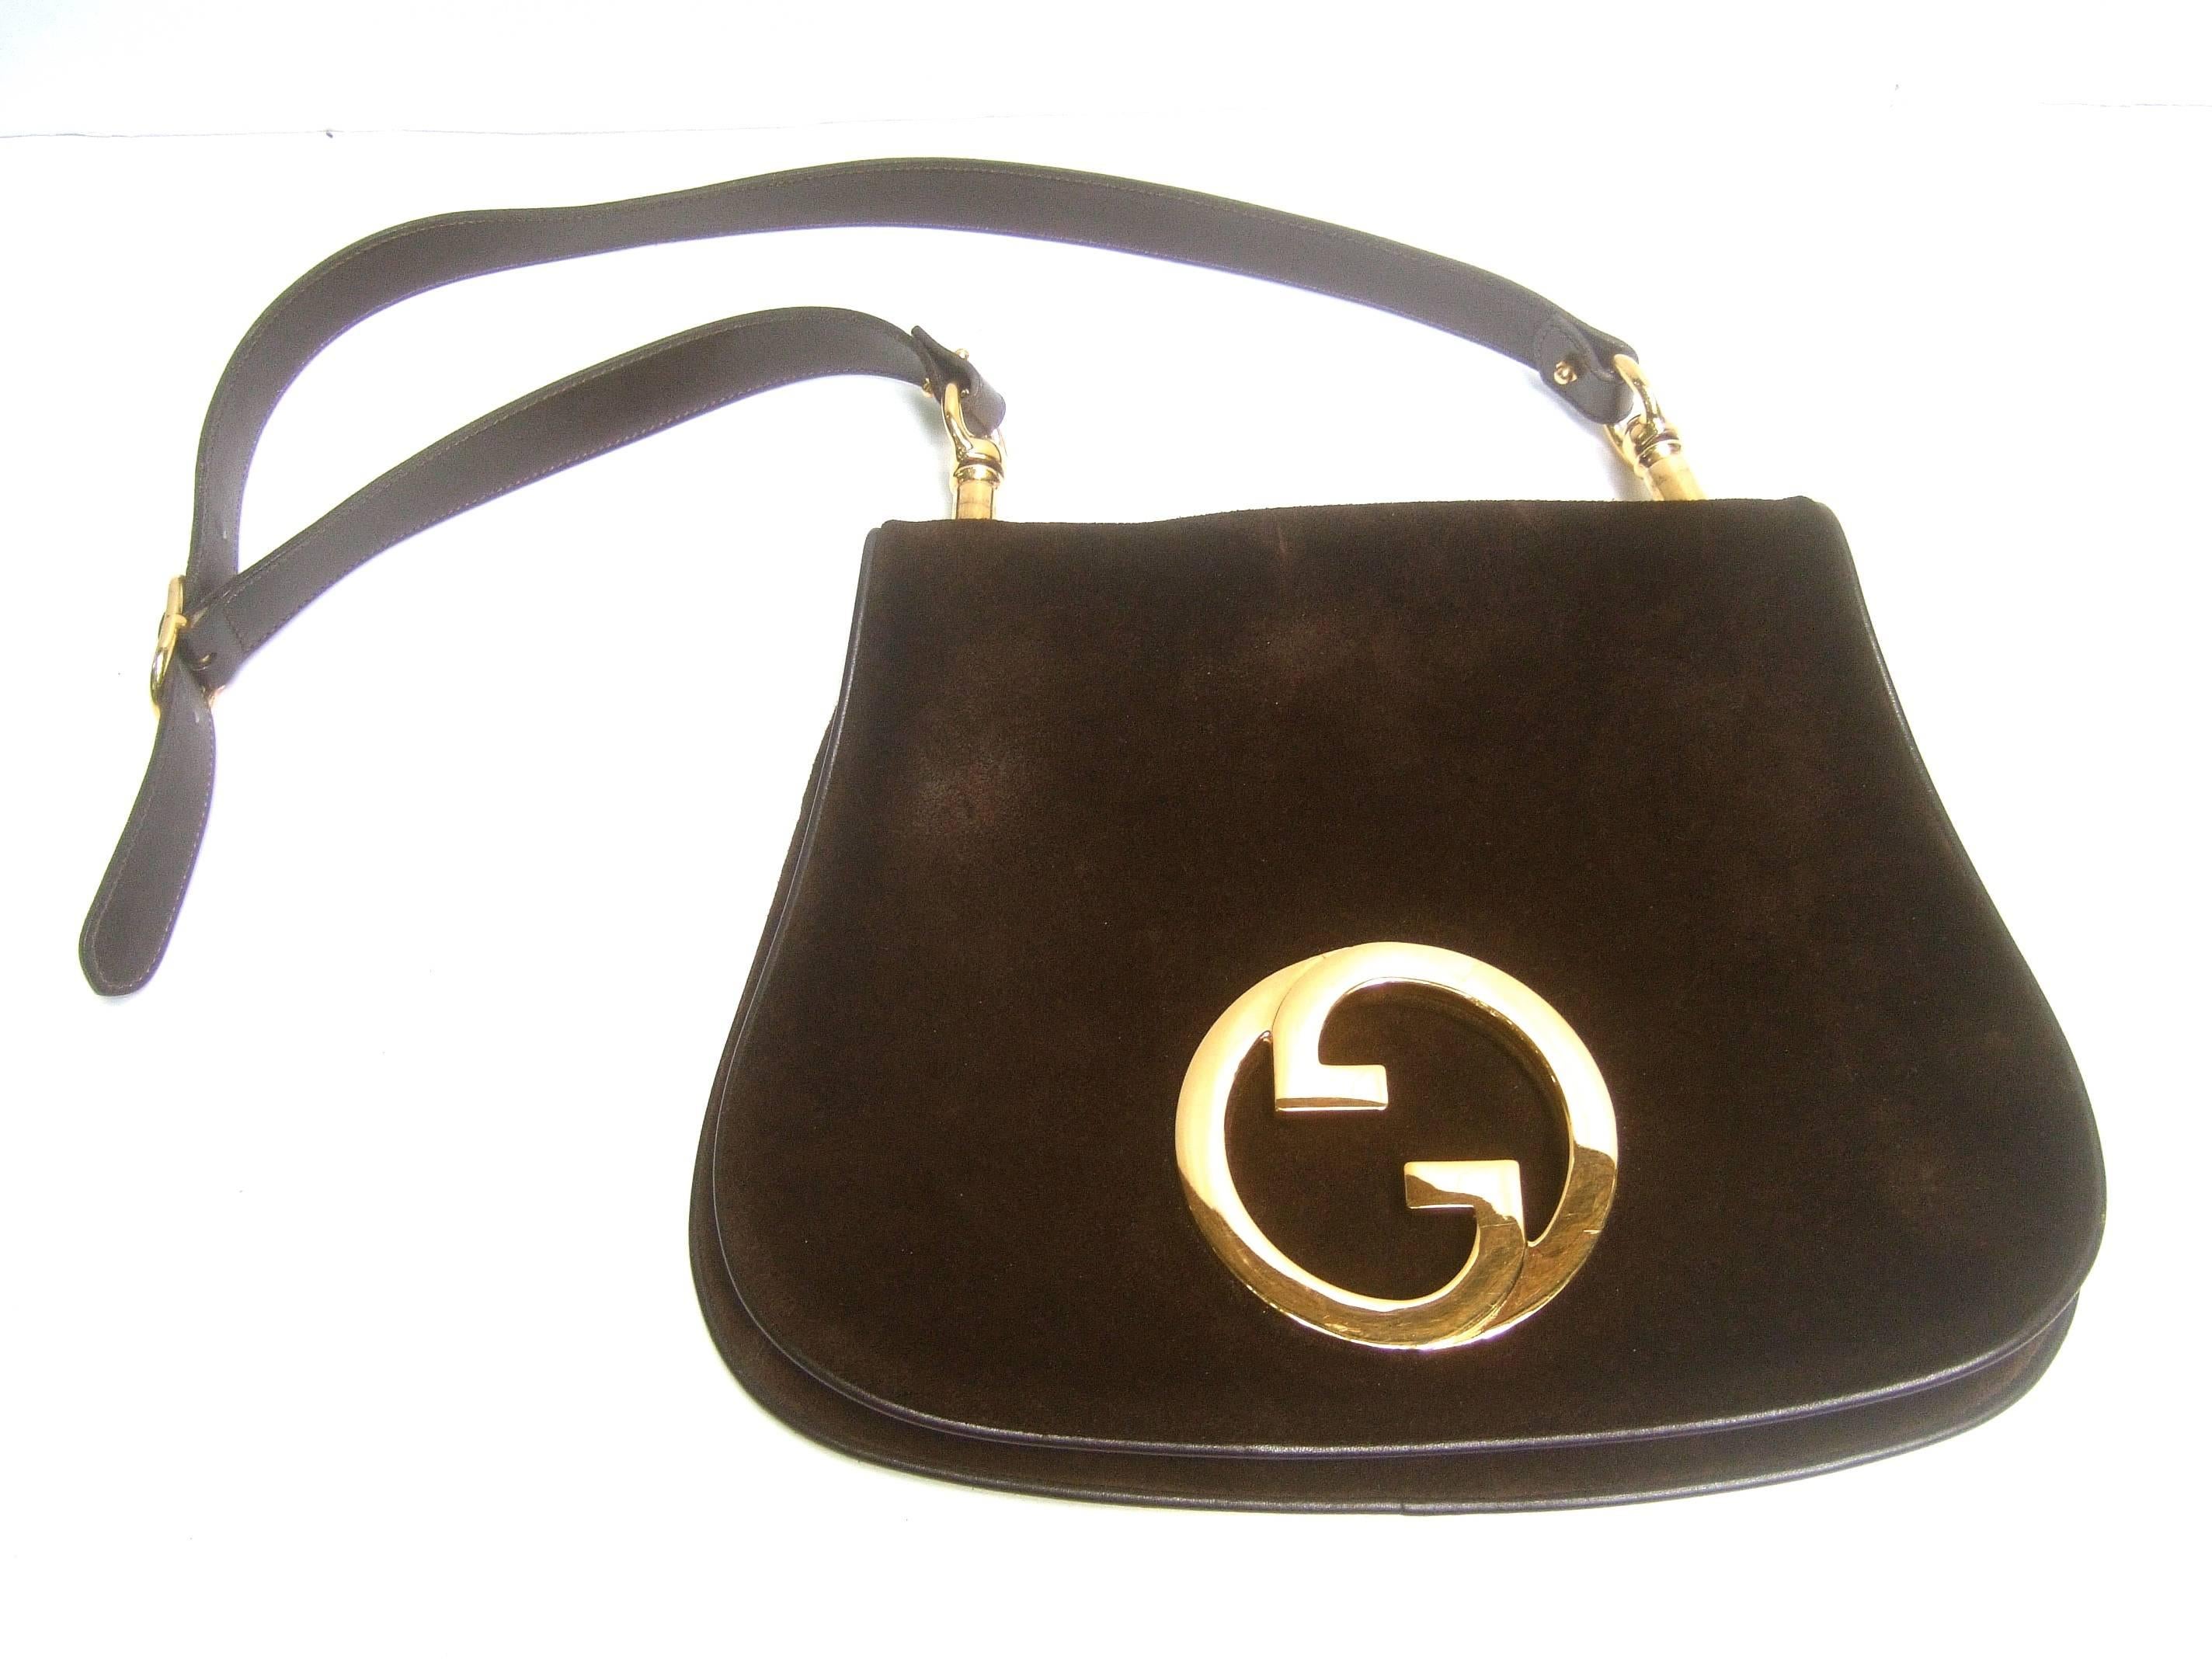 Gucci Luxurious chocolate brown suede blondie shoulder bag c 1970s
The stylish Italian handbag is covered with plush dark brown
doeskin suede 

Adorned with Gucci's massive gilt metal interlocked initials 
Suspended from a dark brown supple